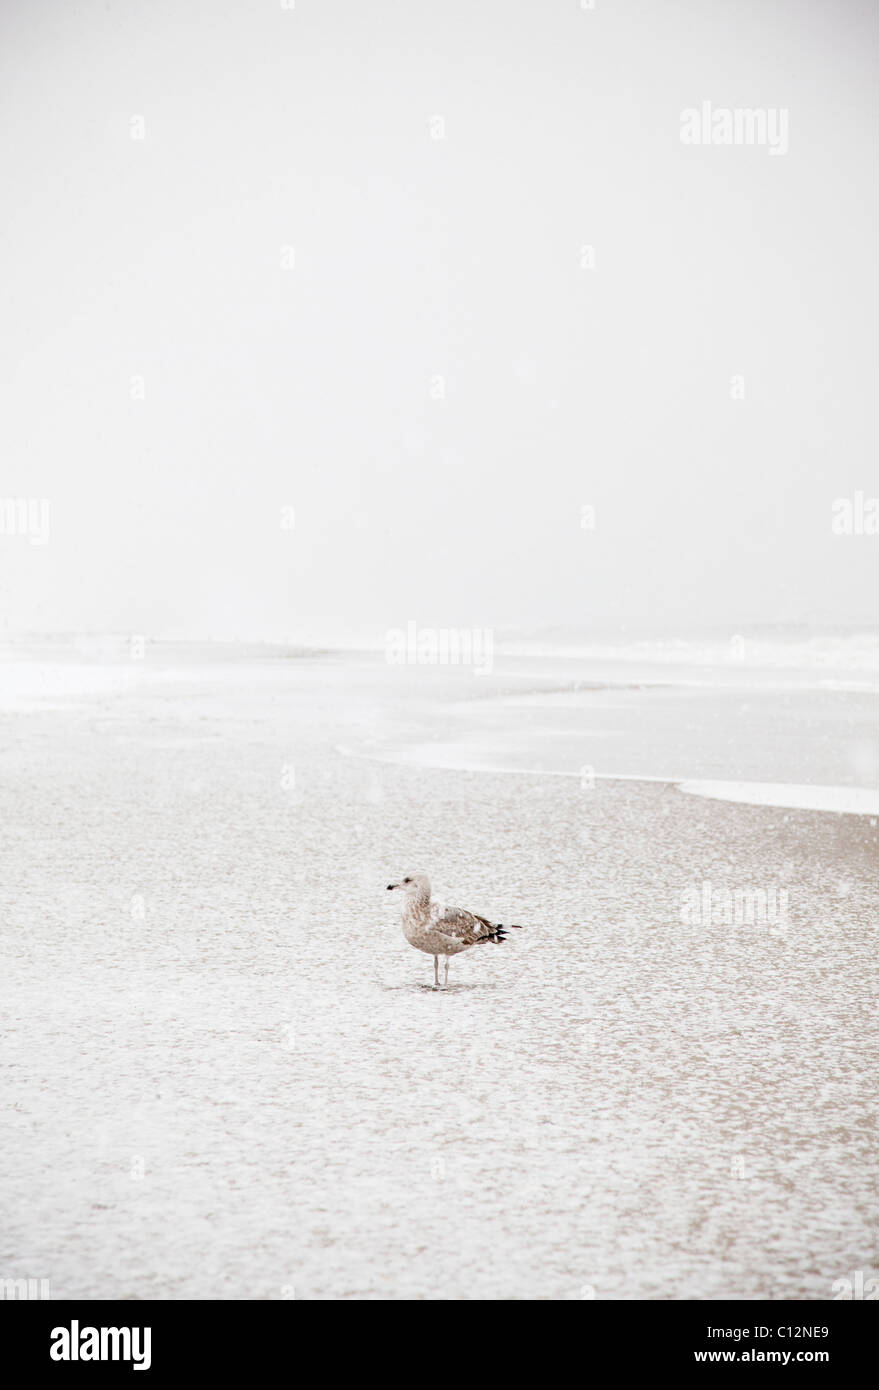 USA, New York State, Rockaway Beach, Seagull on beach in winter Banque D'Images